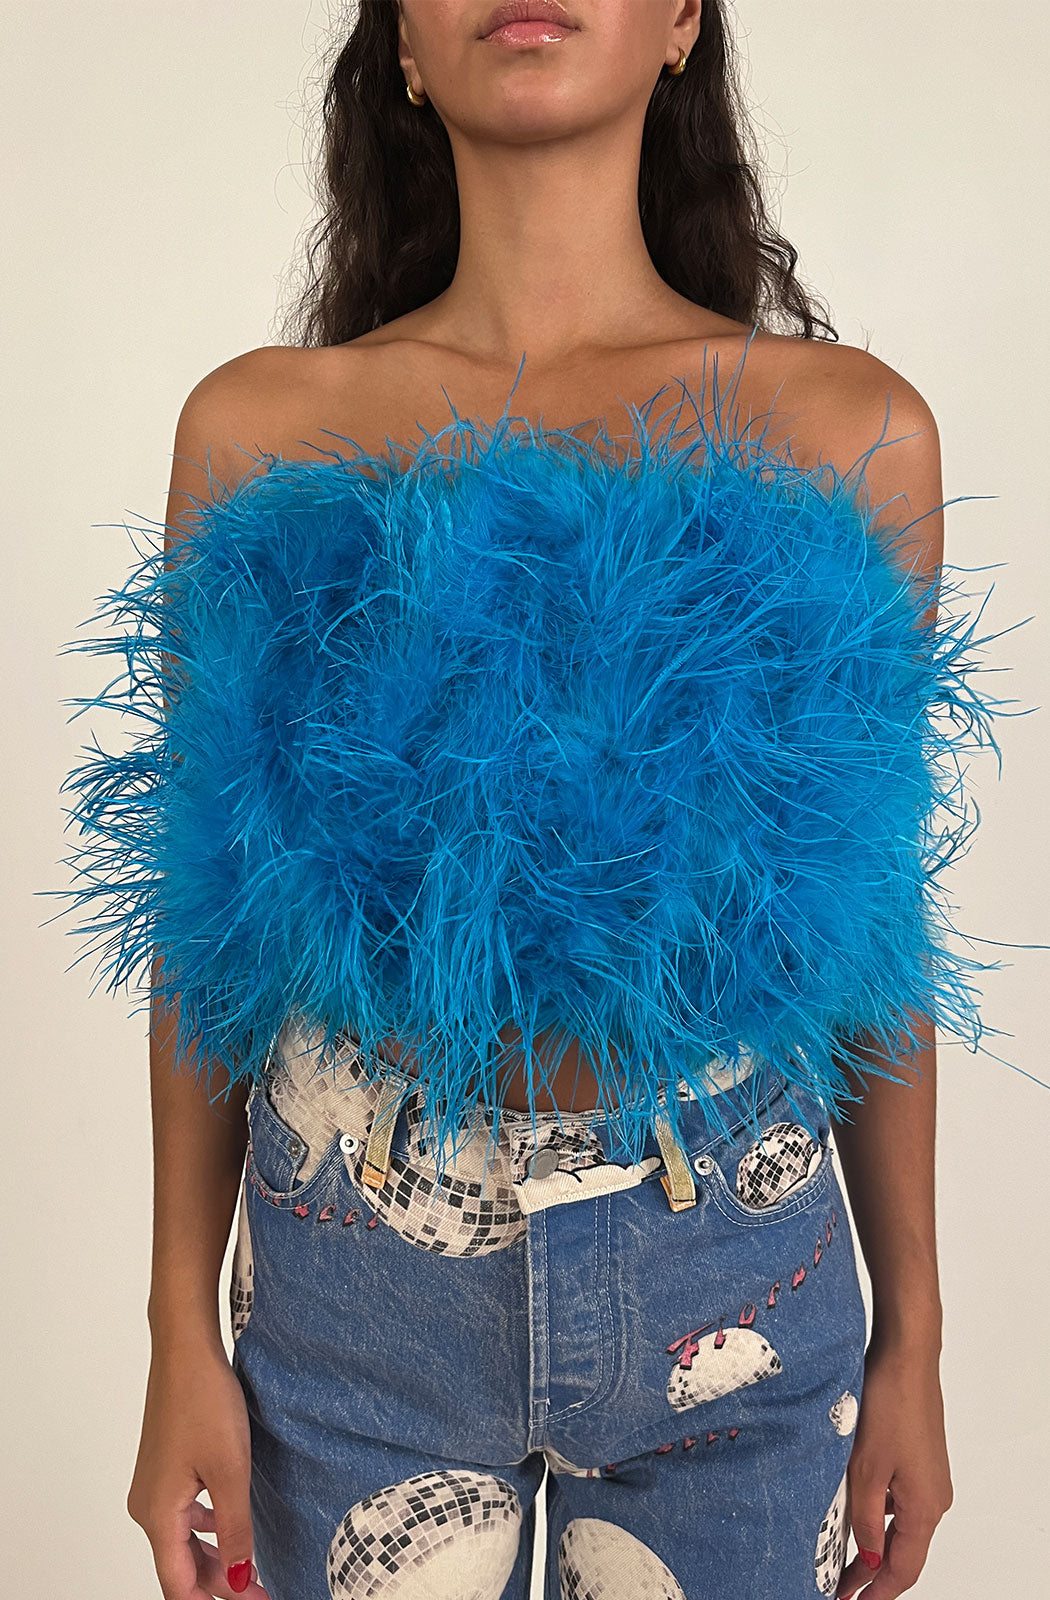 Blue Feather Top/Skirt